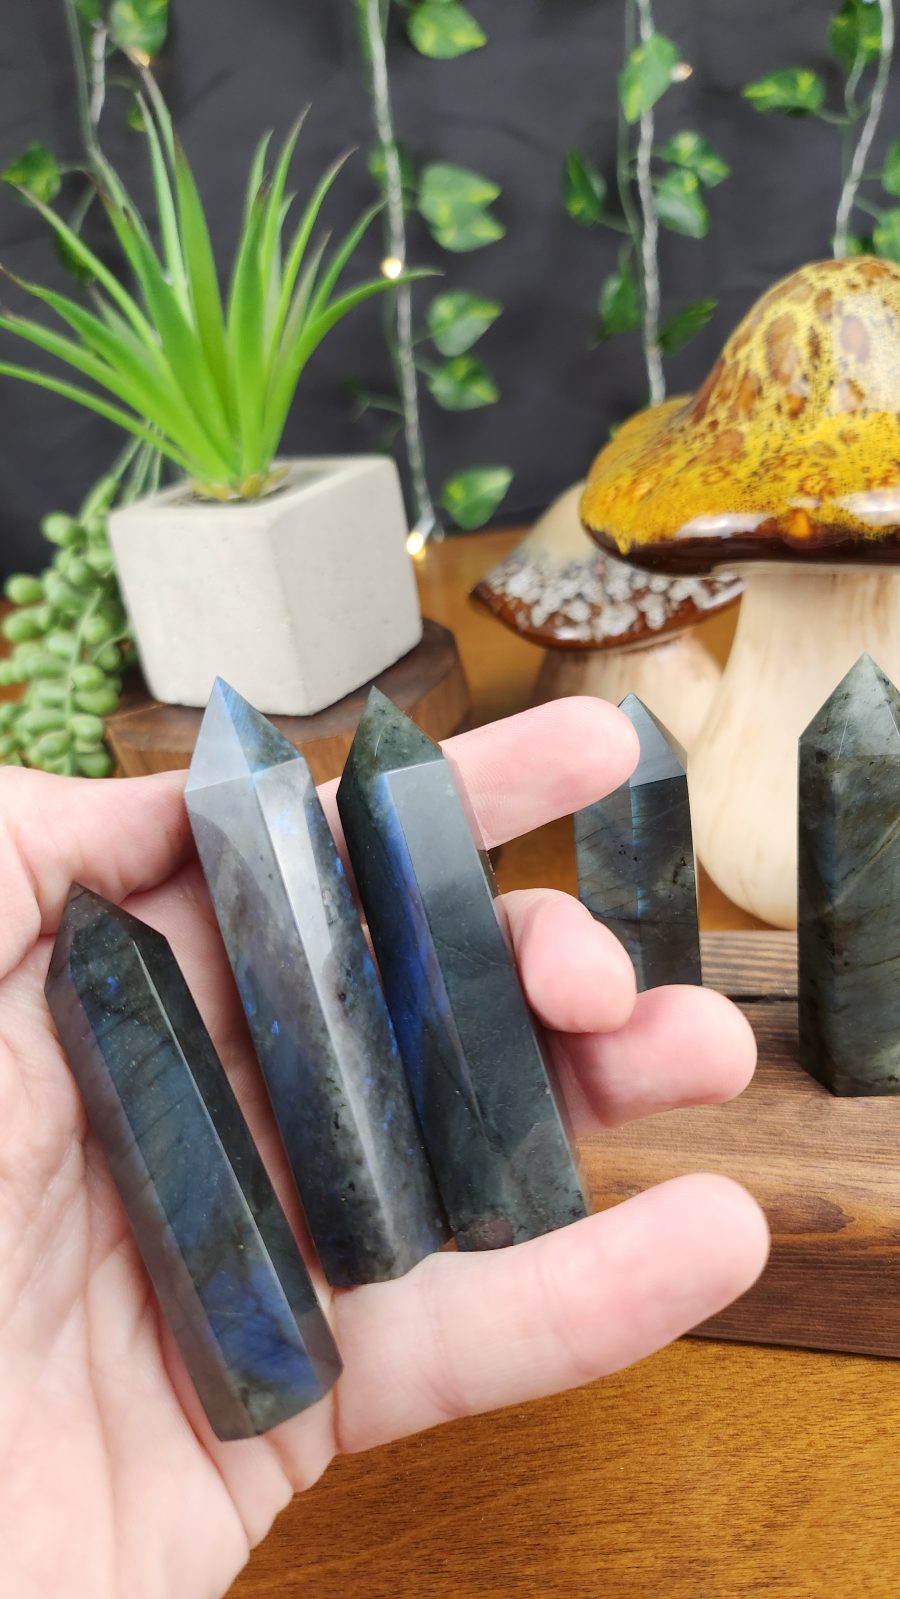 Labradorite crystal points in hand for scale.